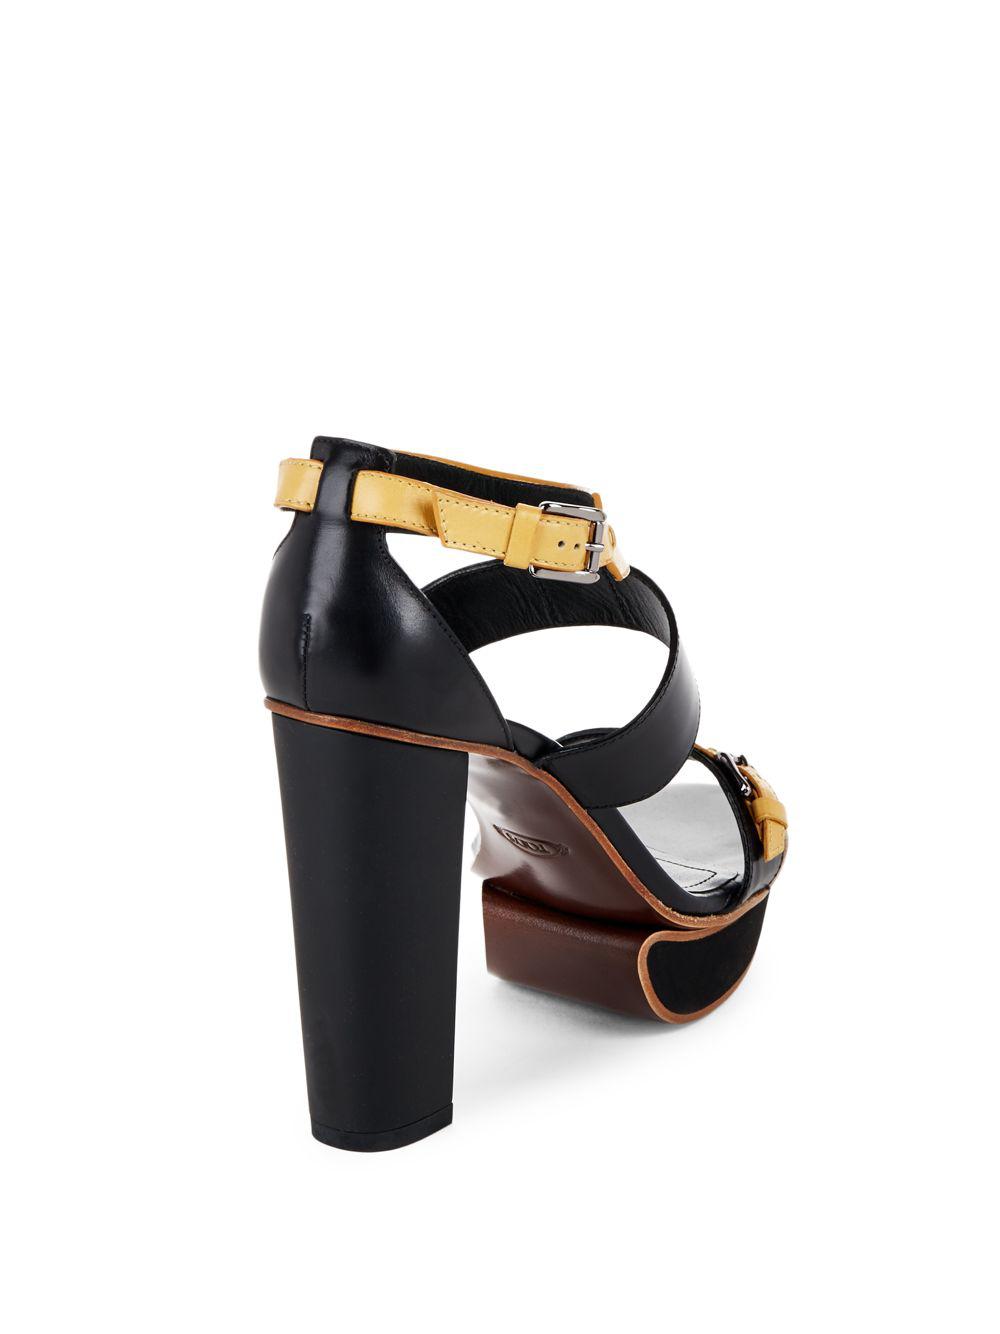 Tod's Leather Two-tone High Heel Platform Sandals in Brown - Lyst